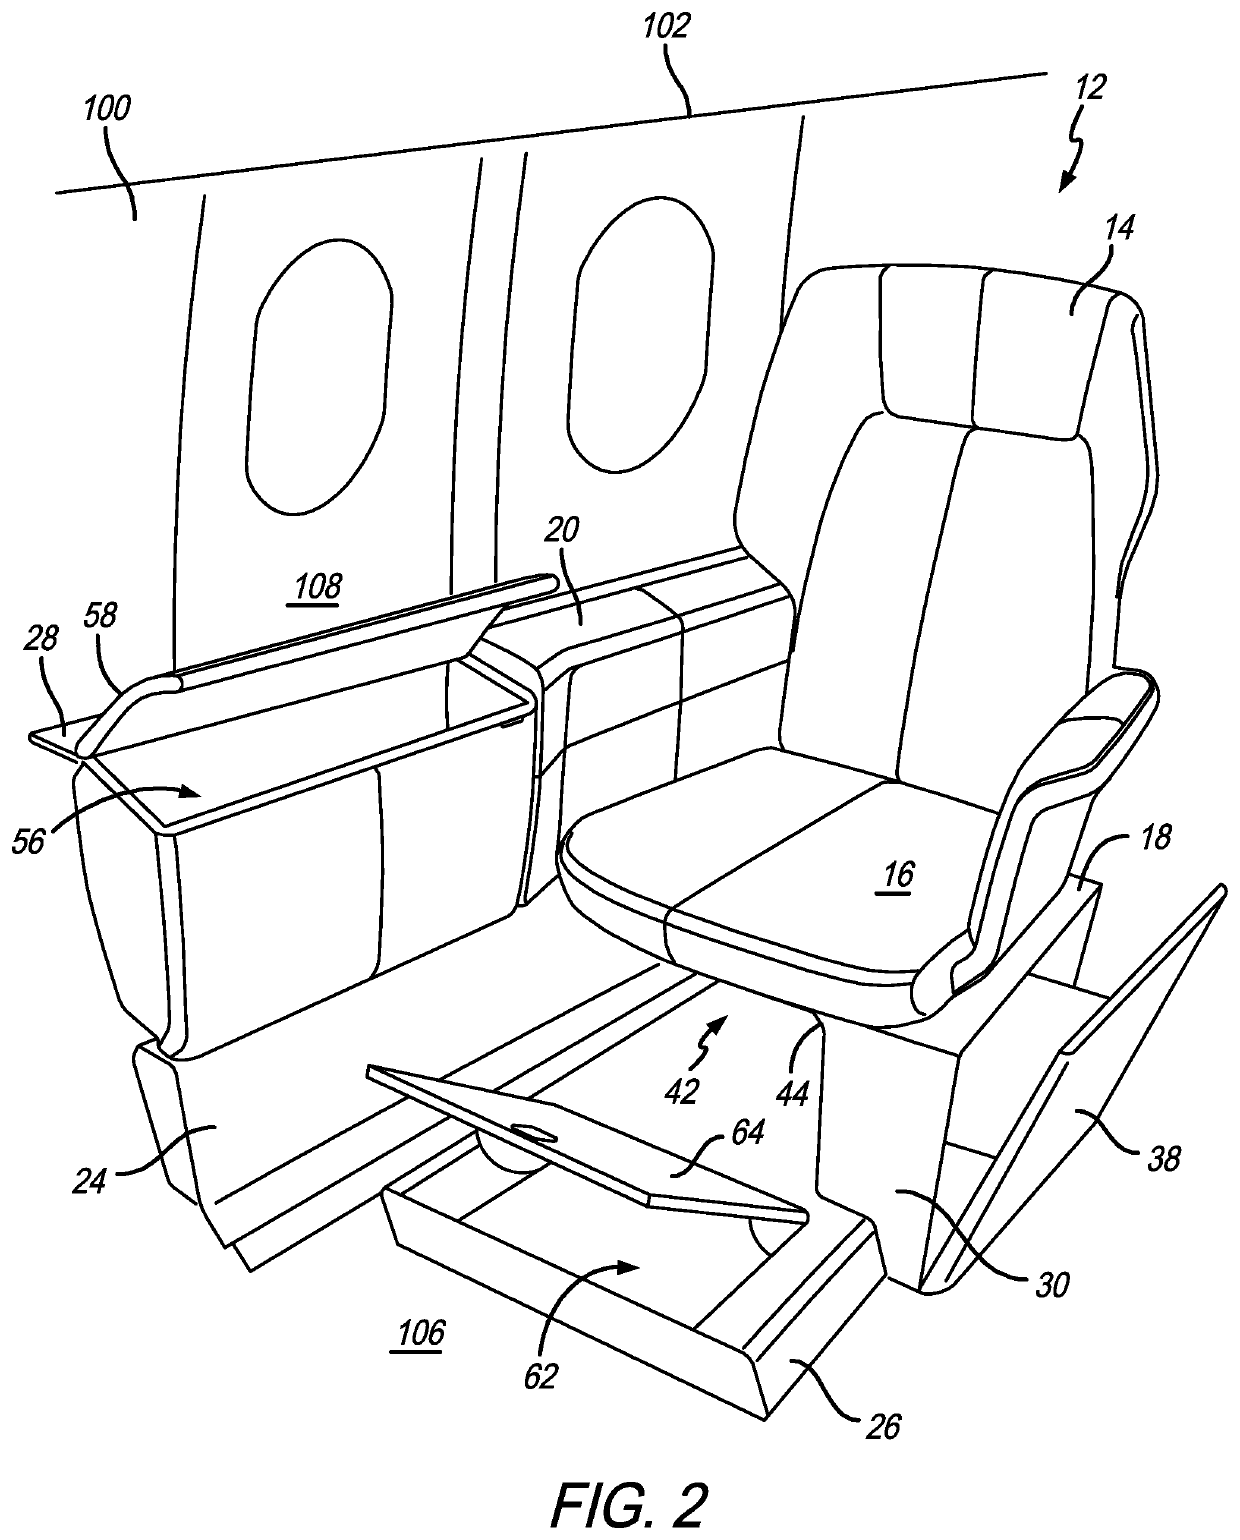 Vehicle business class seat and stowage system